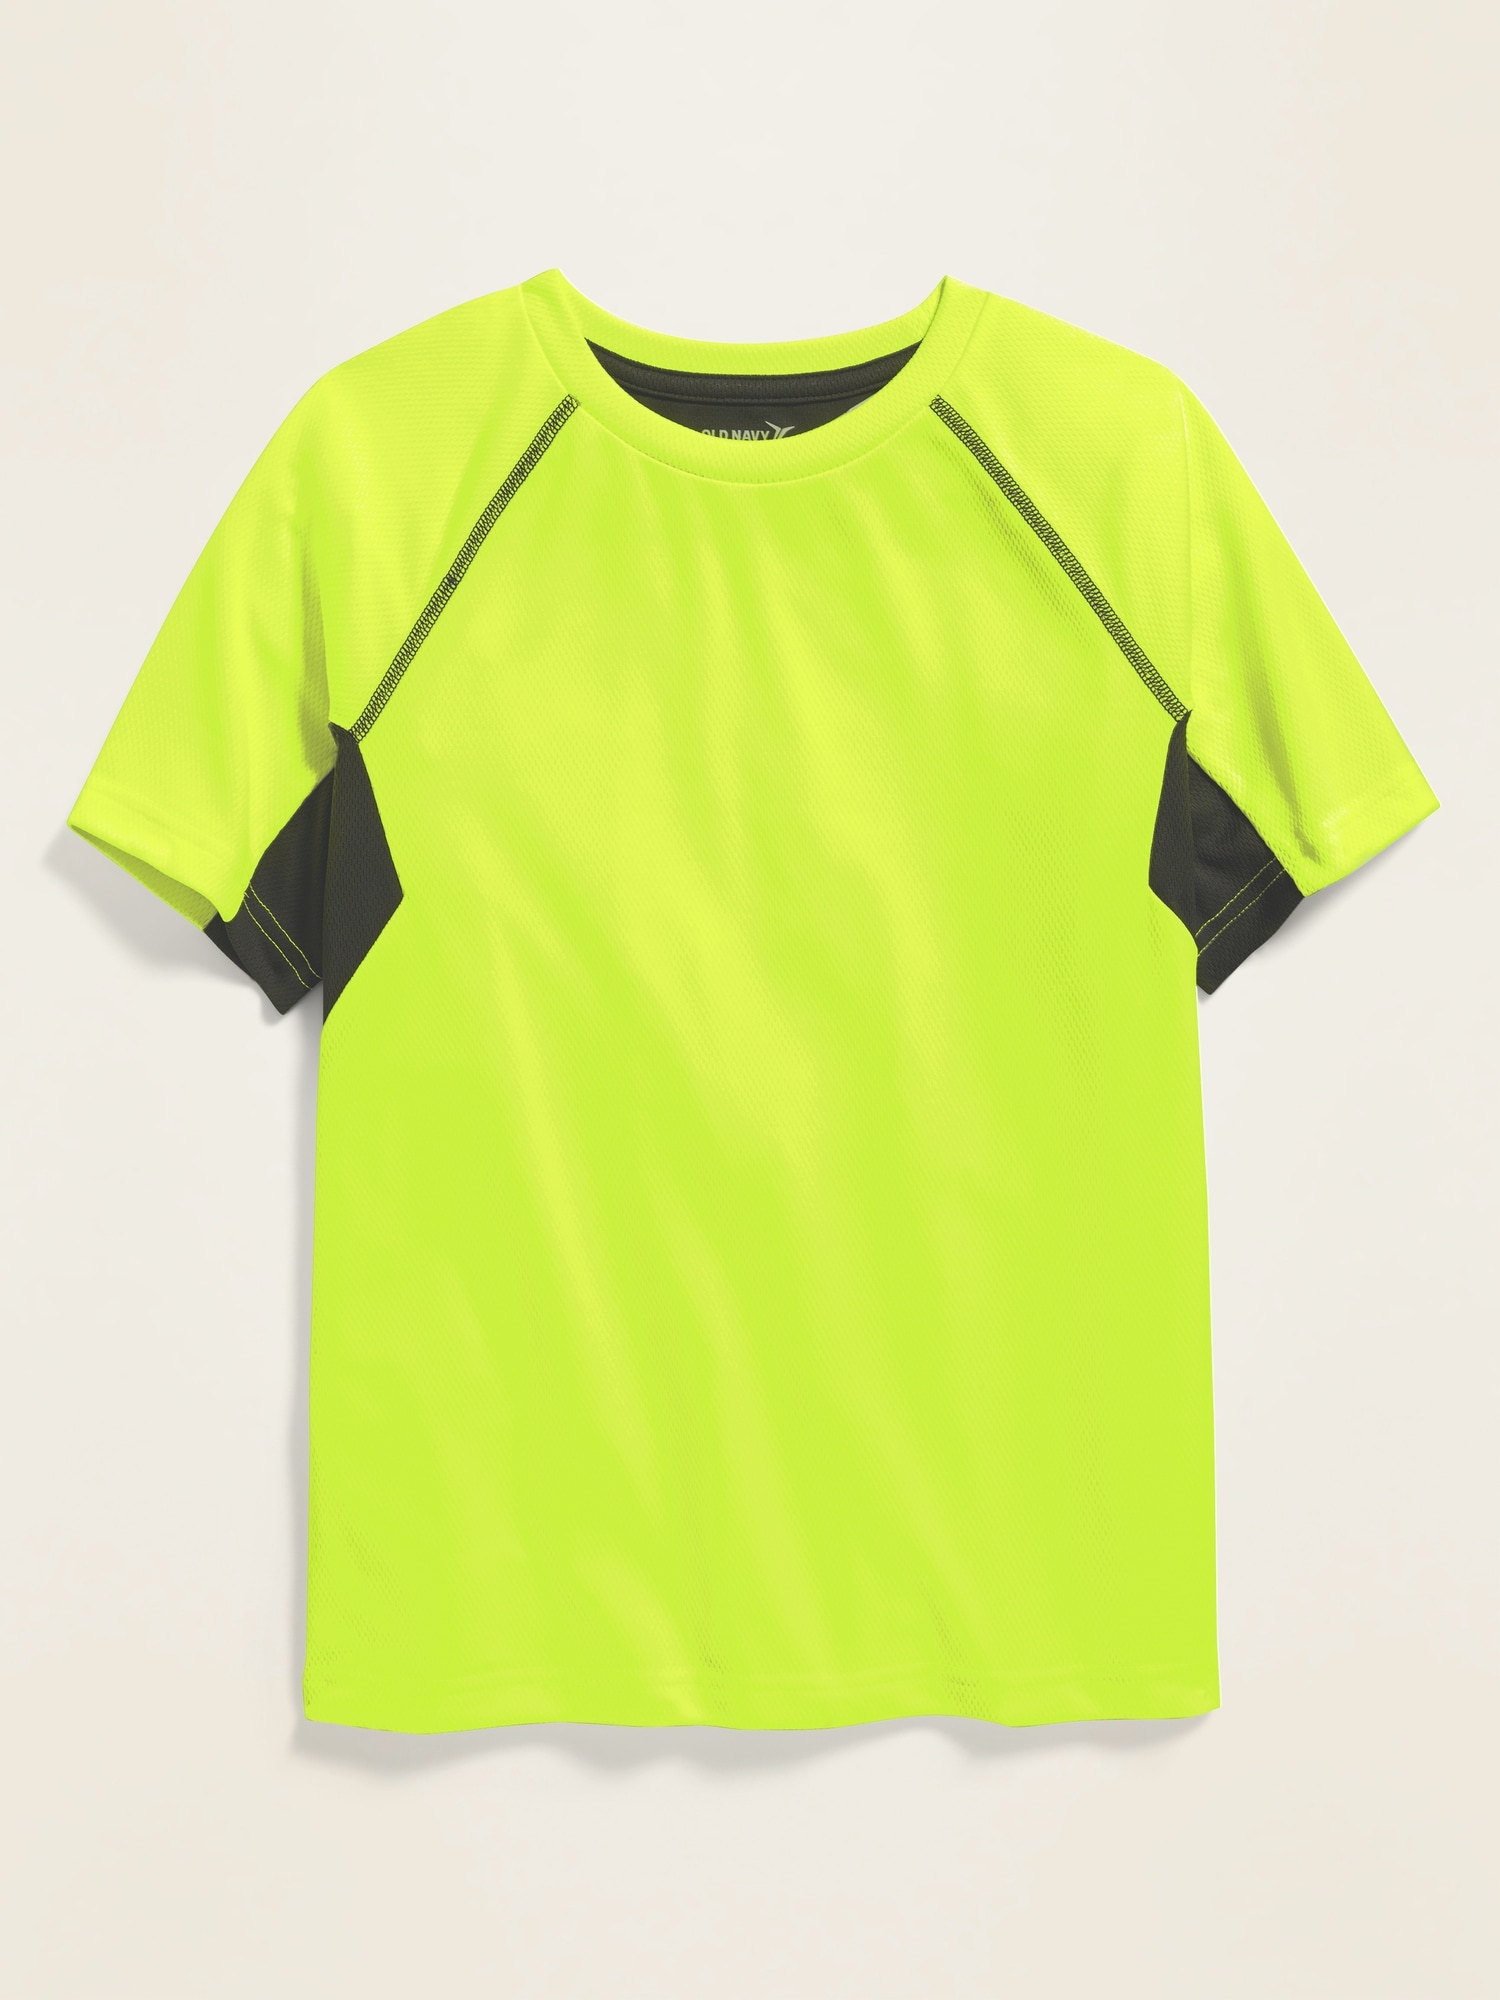 *Today Only Deal* Go-Dry Color-Blocked Mesh Performance Tee for Boys